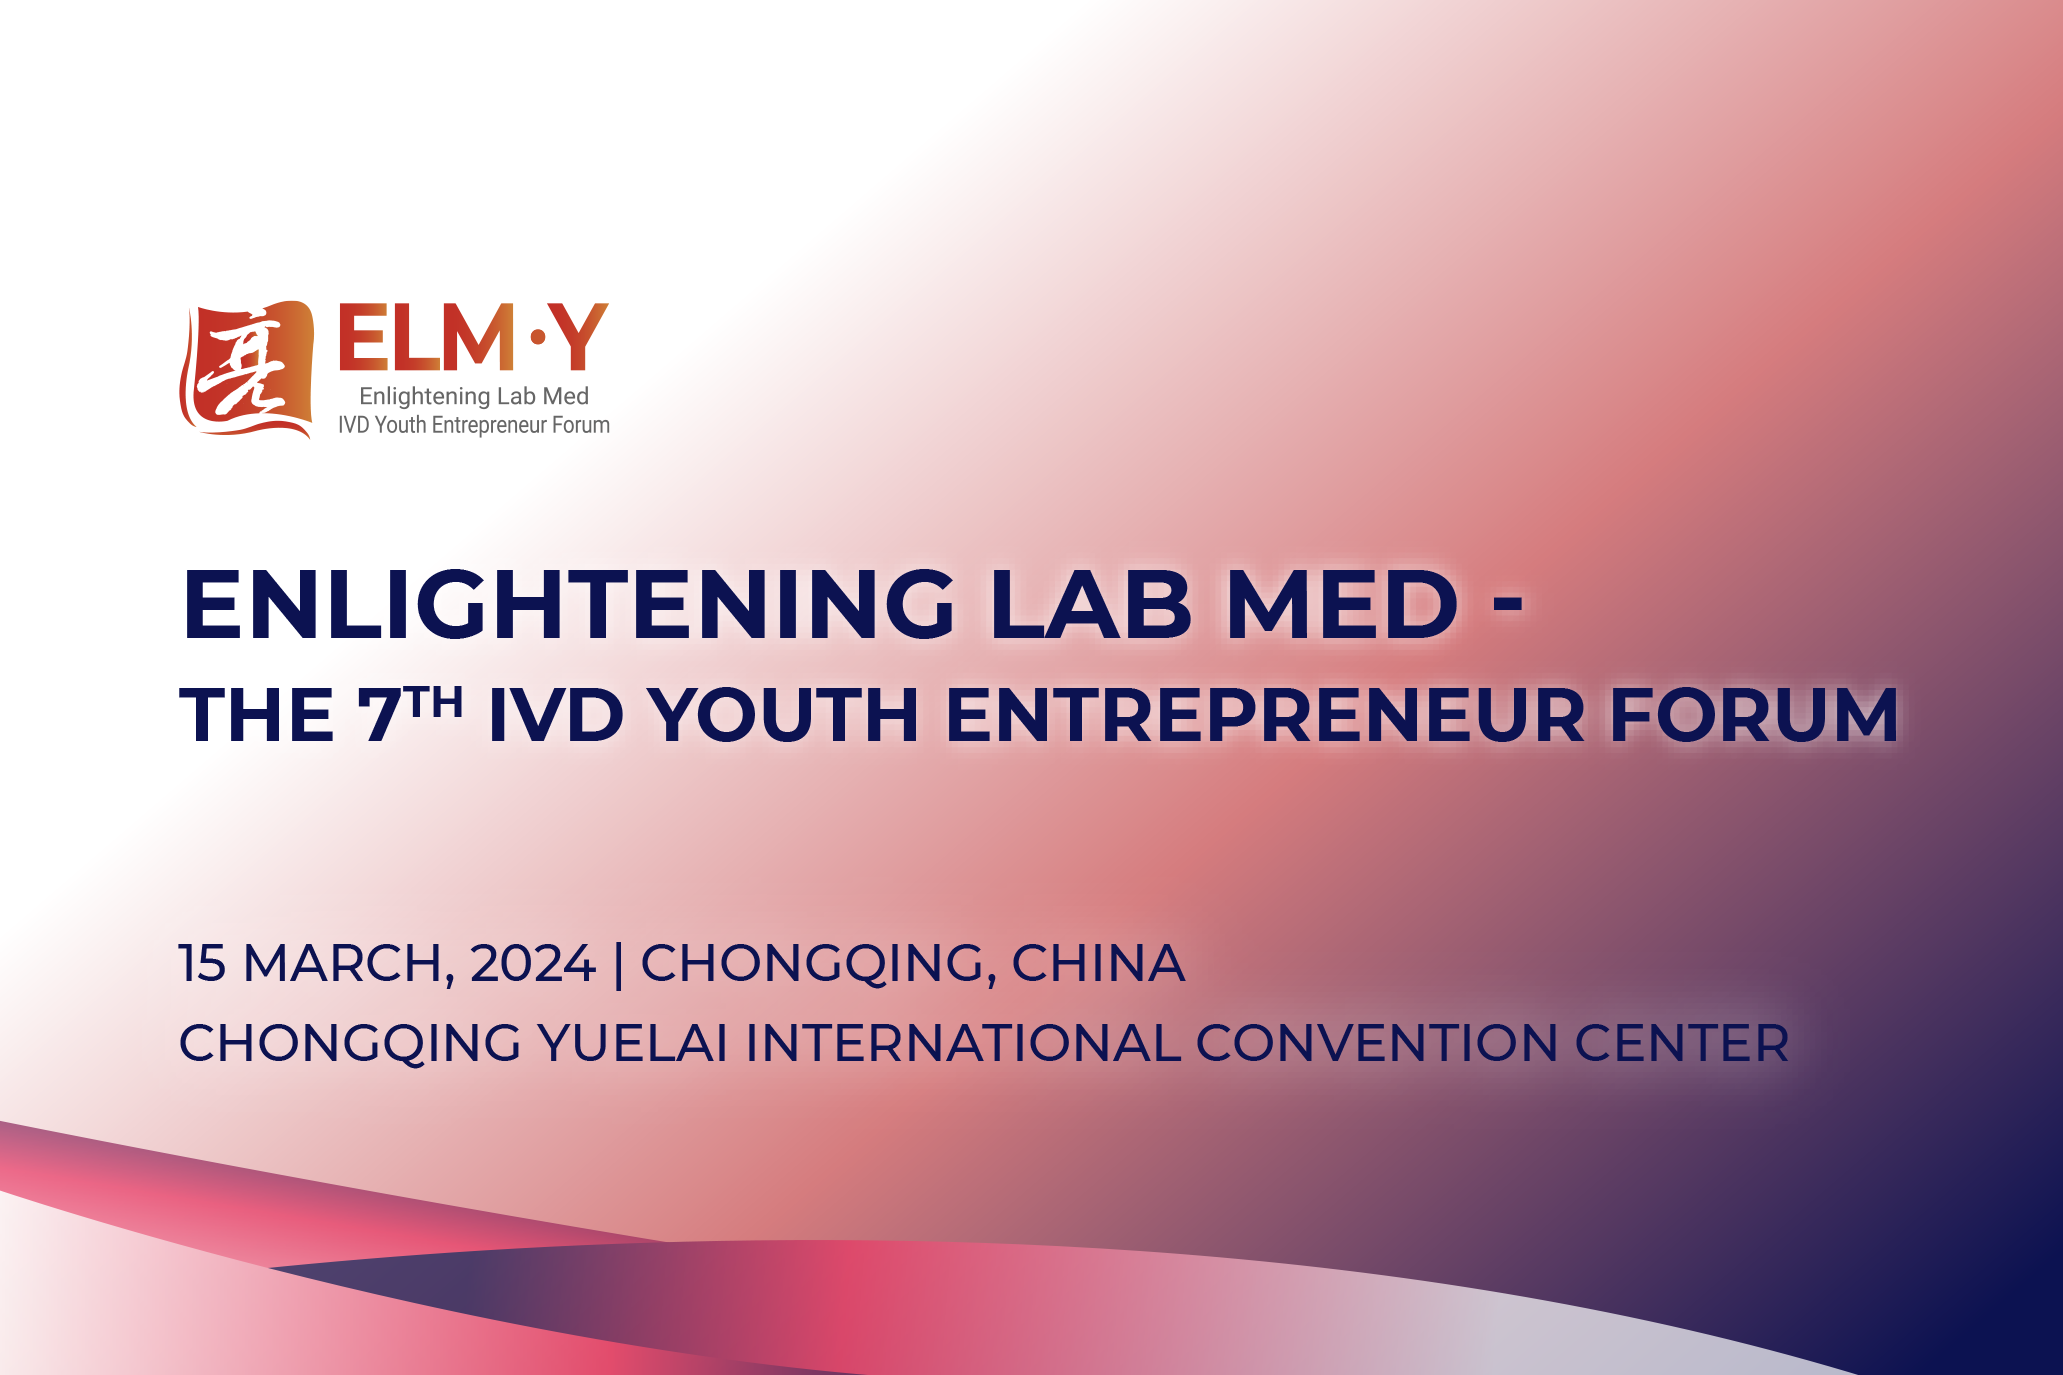 Enlightening Lab Med - The 7th IVD Youth Entrepreneur Forum is planned to open on March 15 